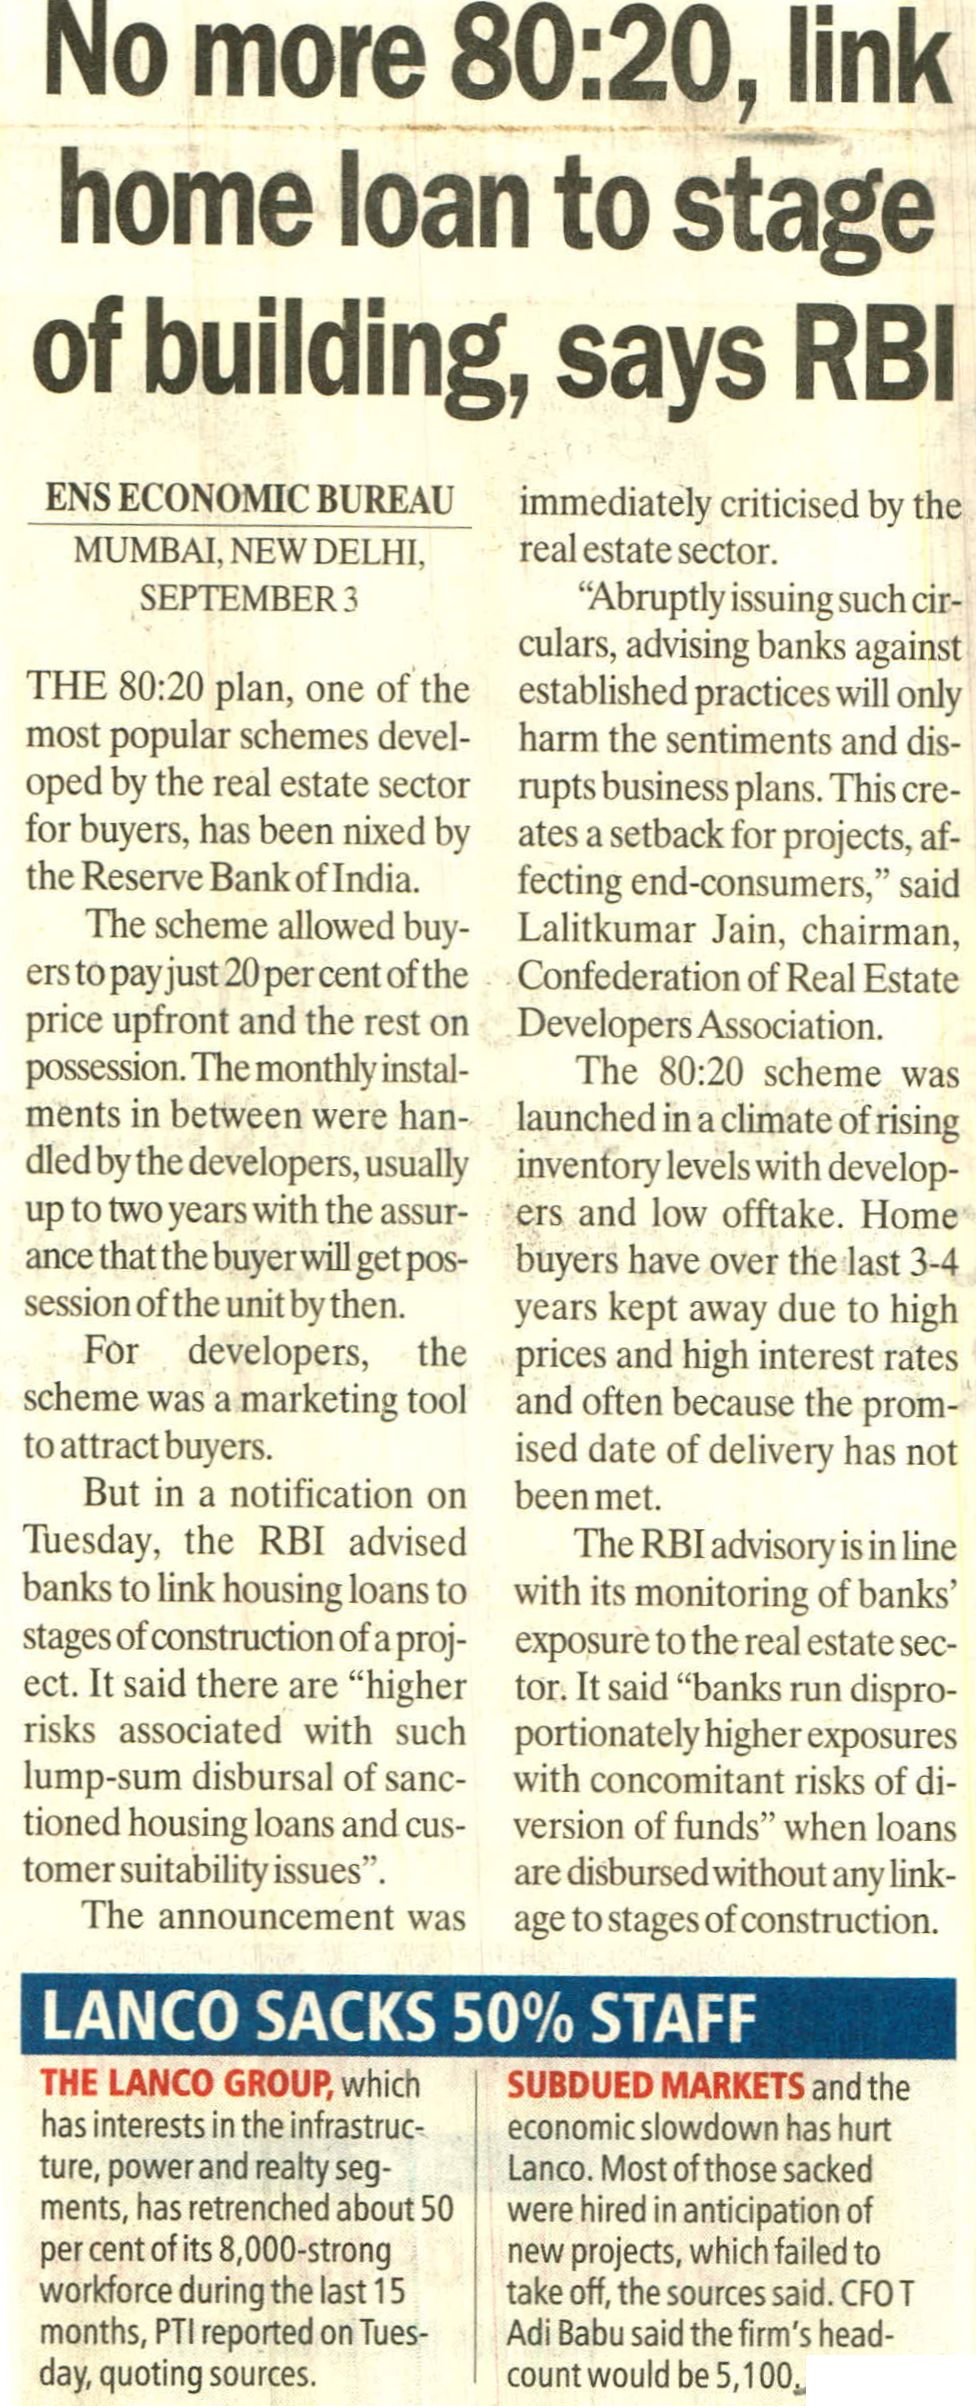 No more 80:20, link hoke loan to stage of building, says RBI